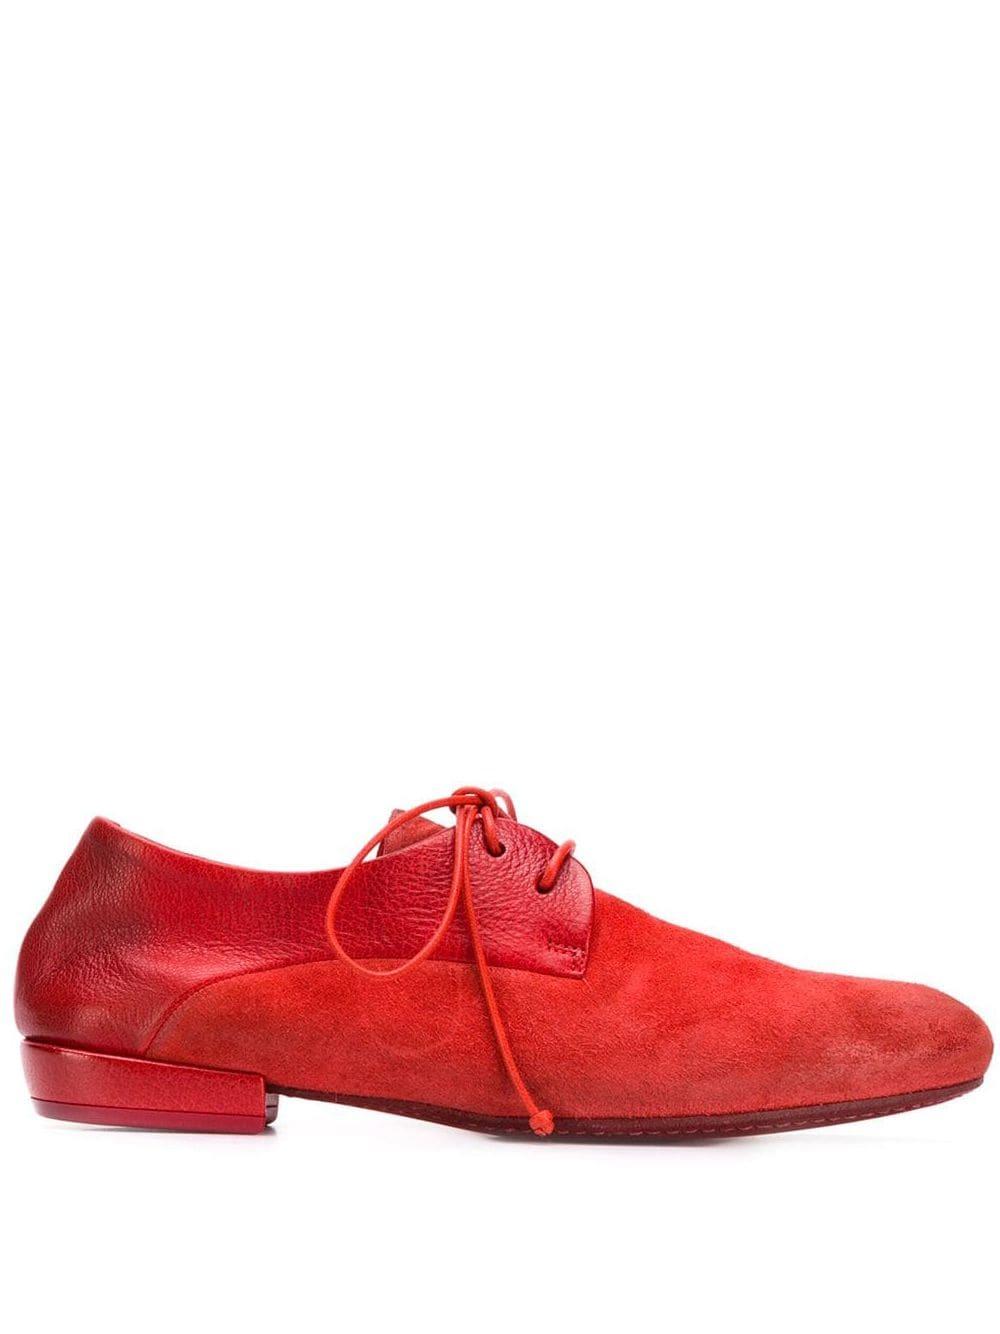 Marsèll Leather Derby Shoes in Red - Lyst